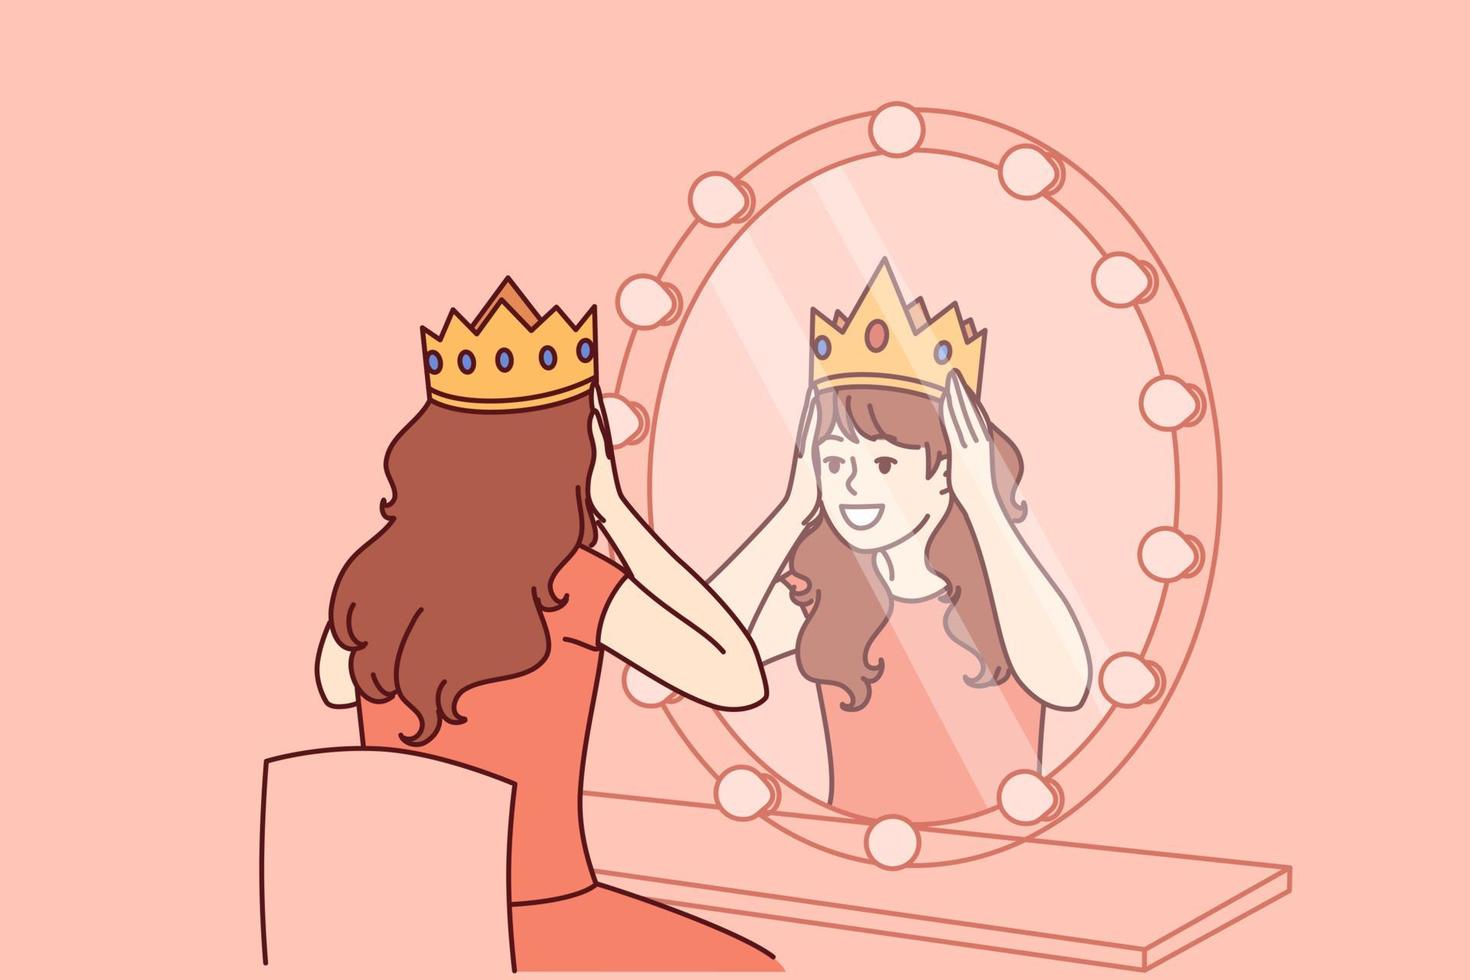 Little actress tries on crown sitting in dressing room with mirror and dreams of playing role of princess on theater stage. Teenage girl puts princess crown on head dreaming of living among kings vector